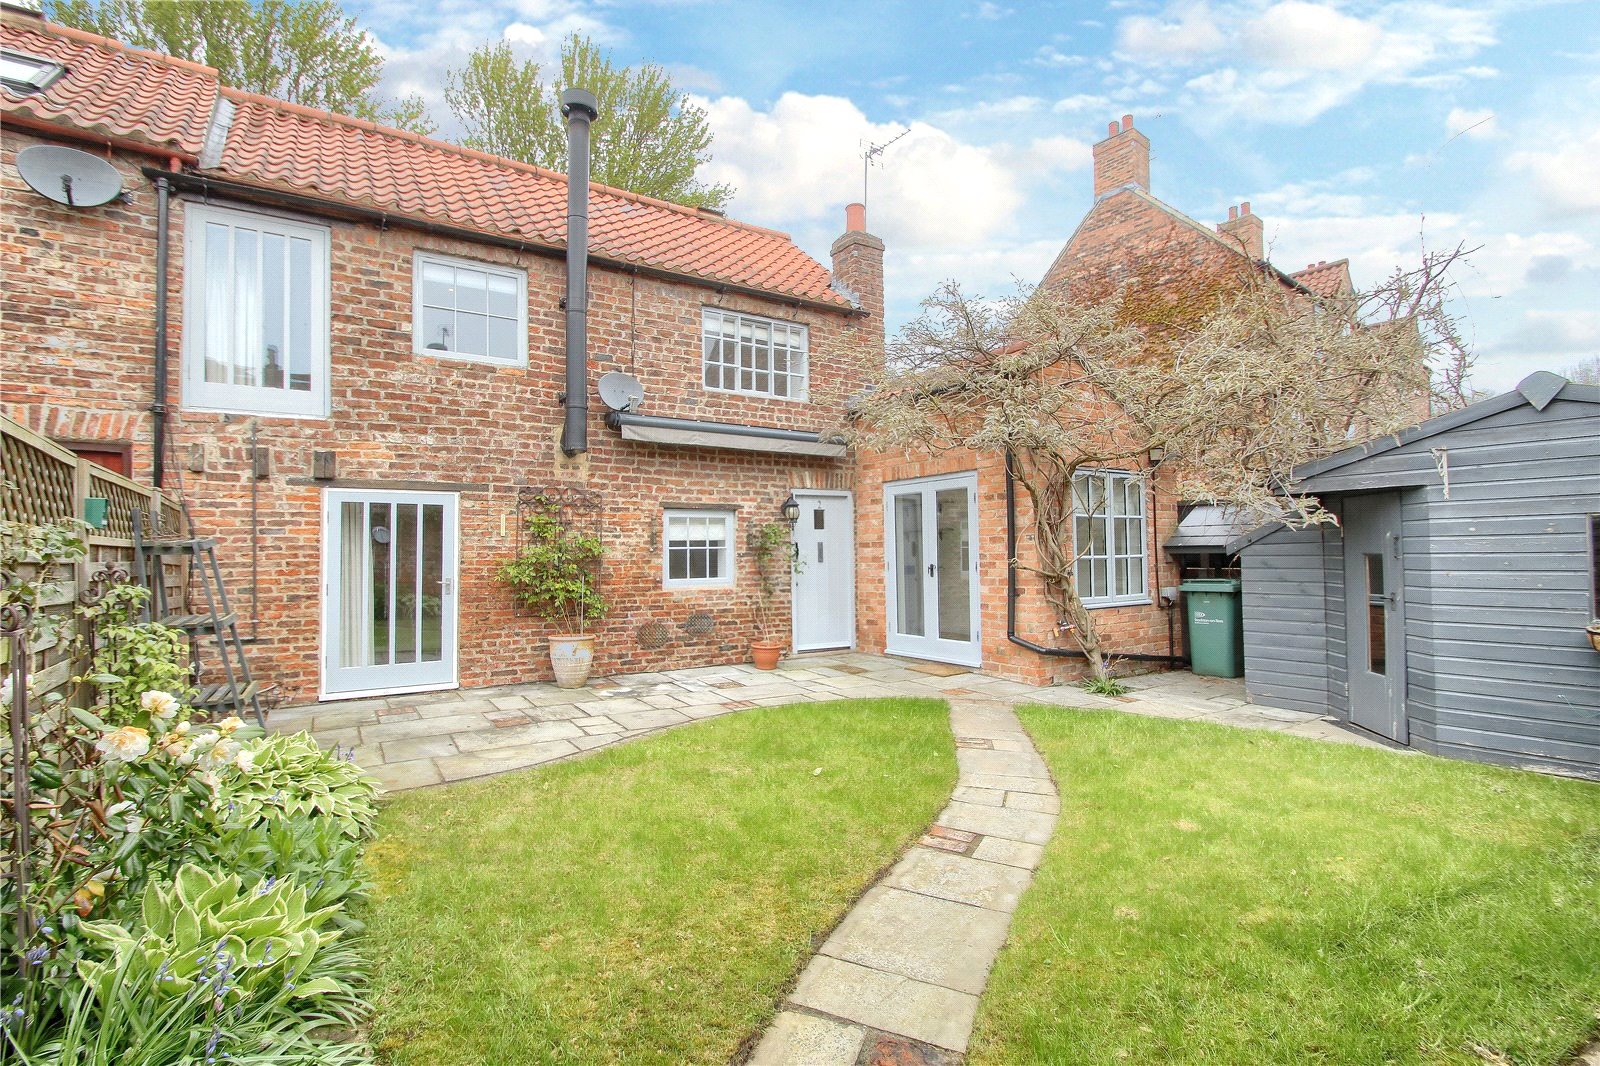 2 bed house for sale in Tom Browns Wynd, Yarm - Property Image 1